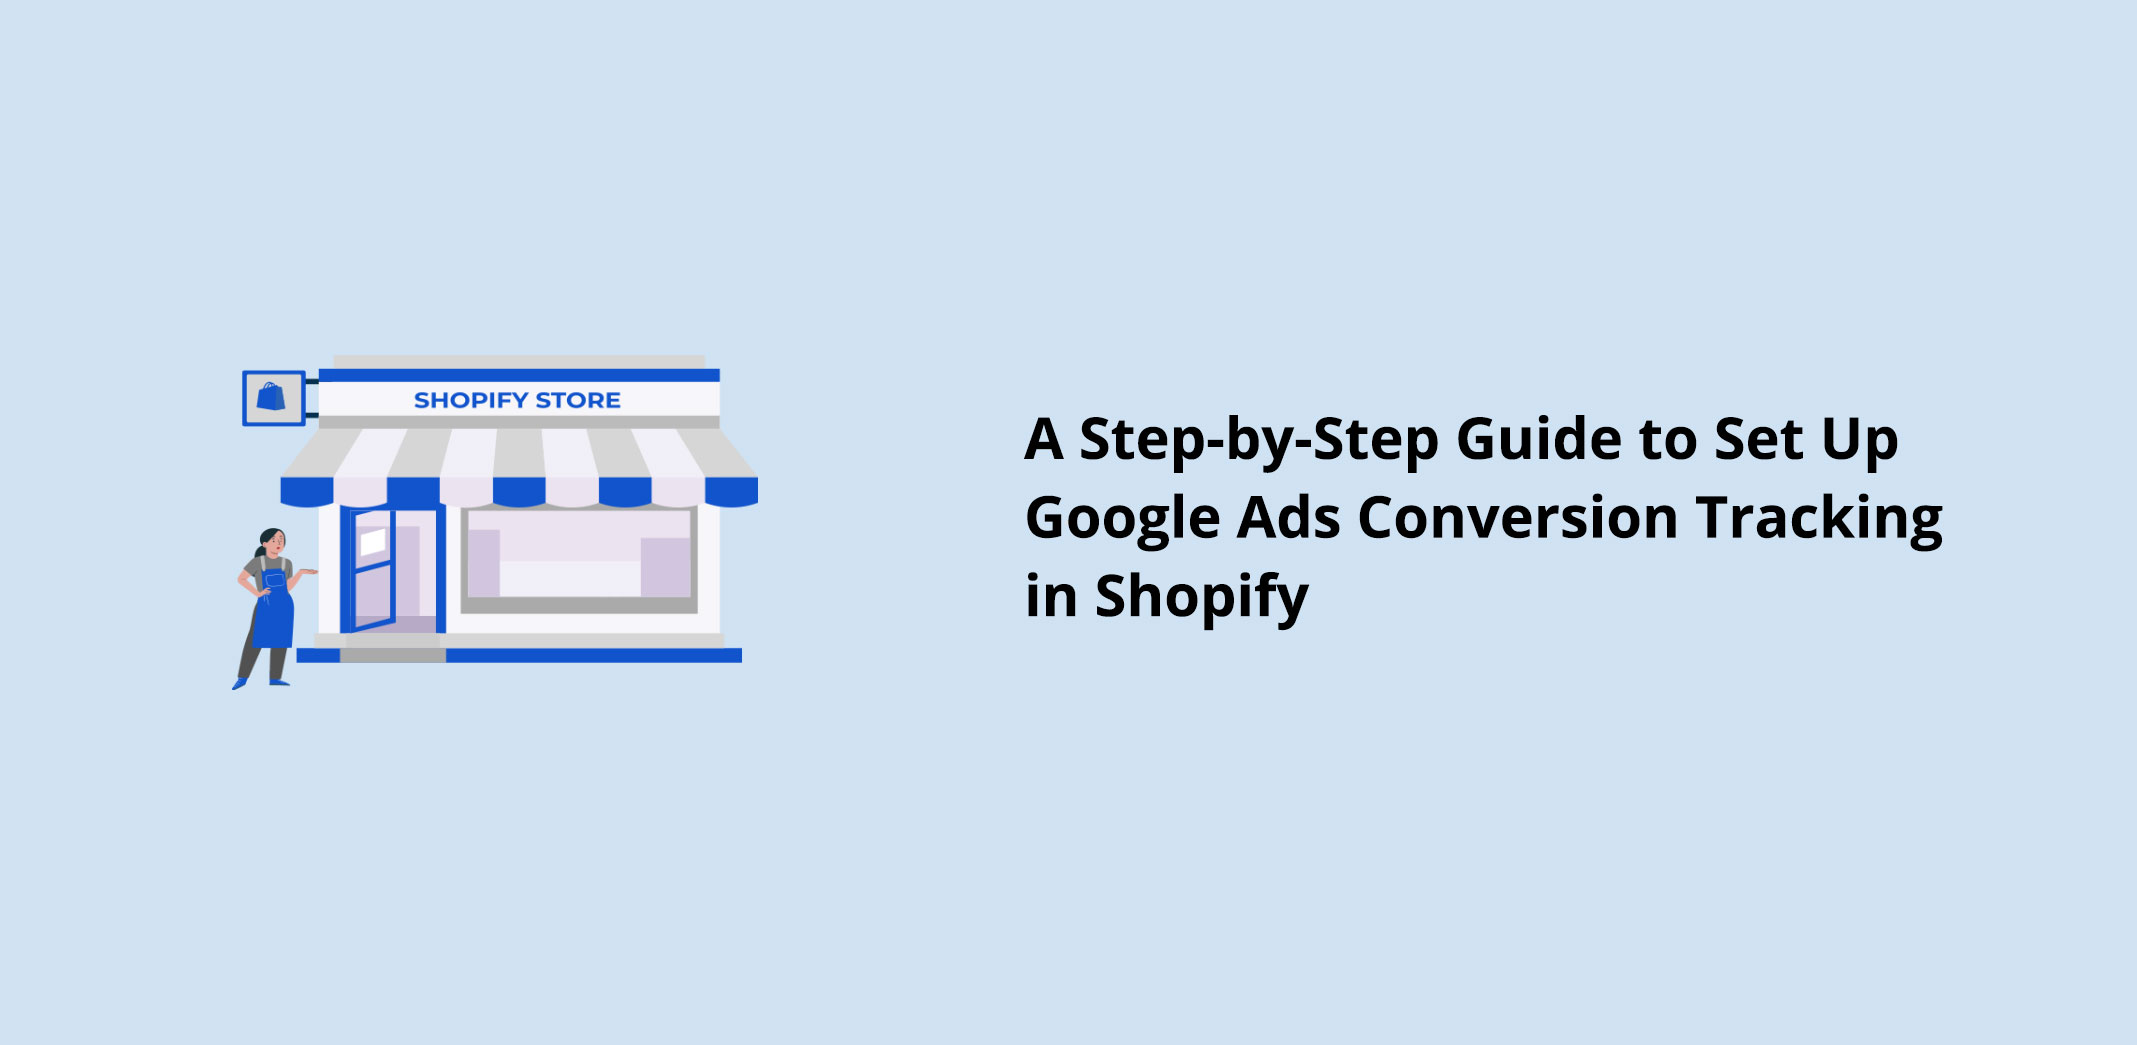 A Step-by-Step Guide to Set Up Google Ads Conversion Tracking in Shopify